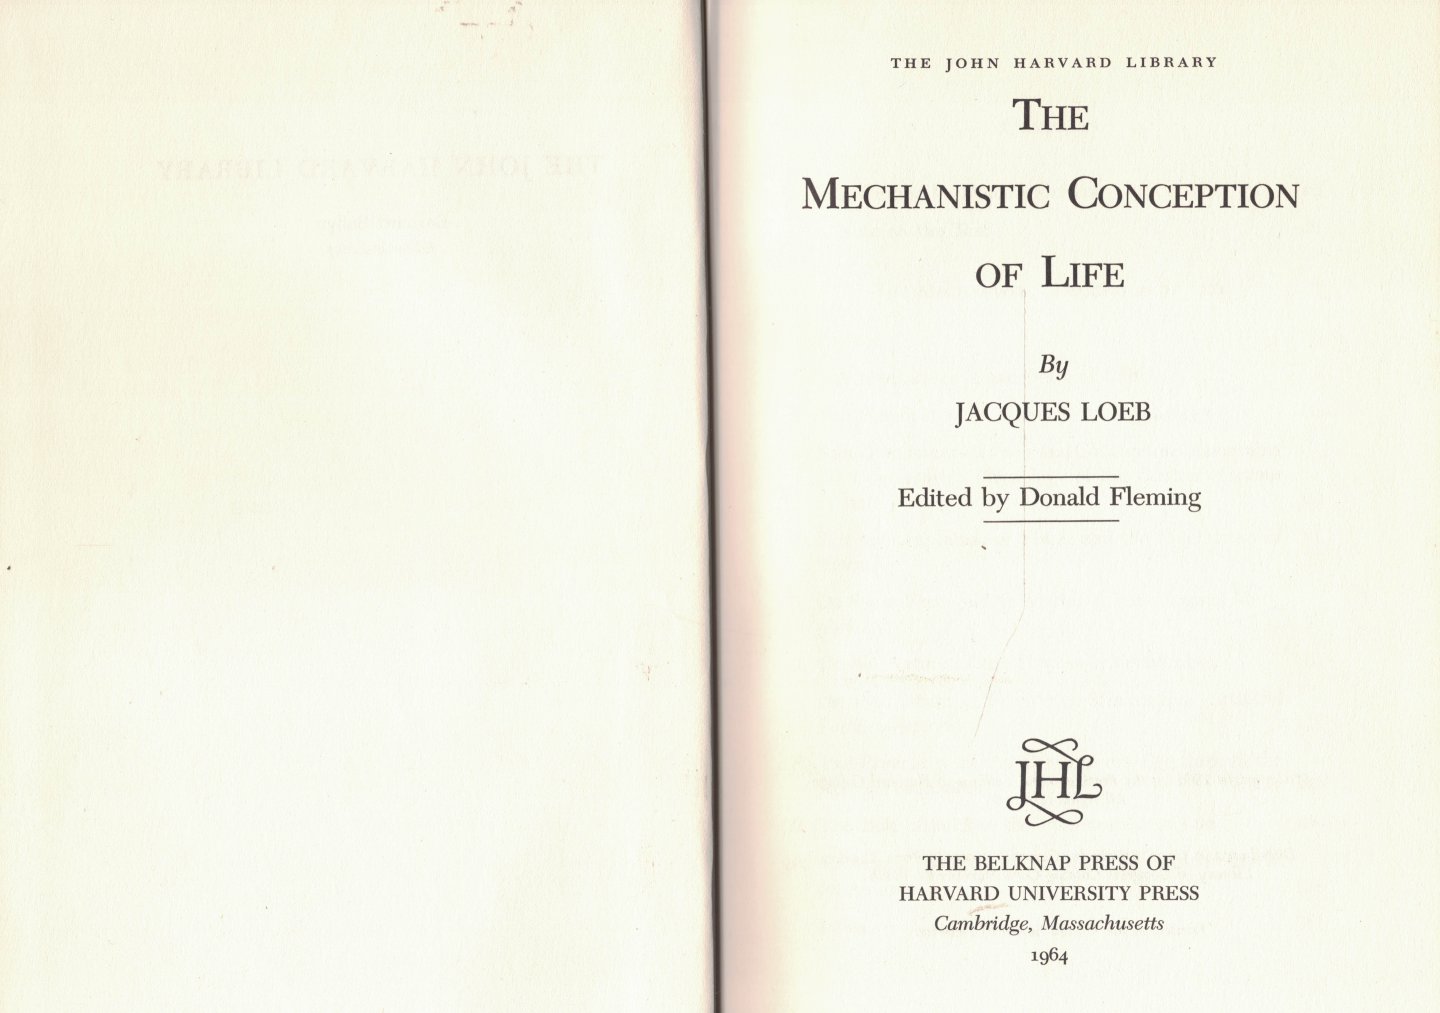 Loeb, Jacques & Donald Fleming (editor) - The Mechanistic Conception of Life